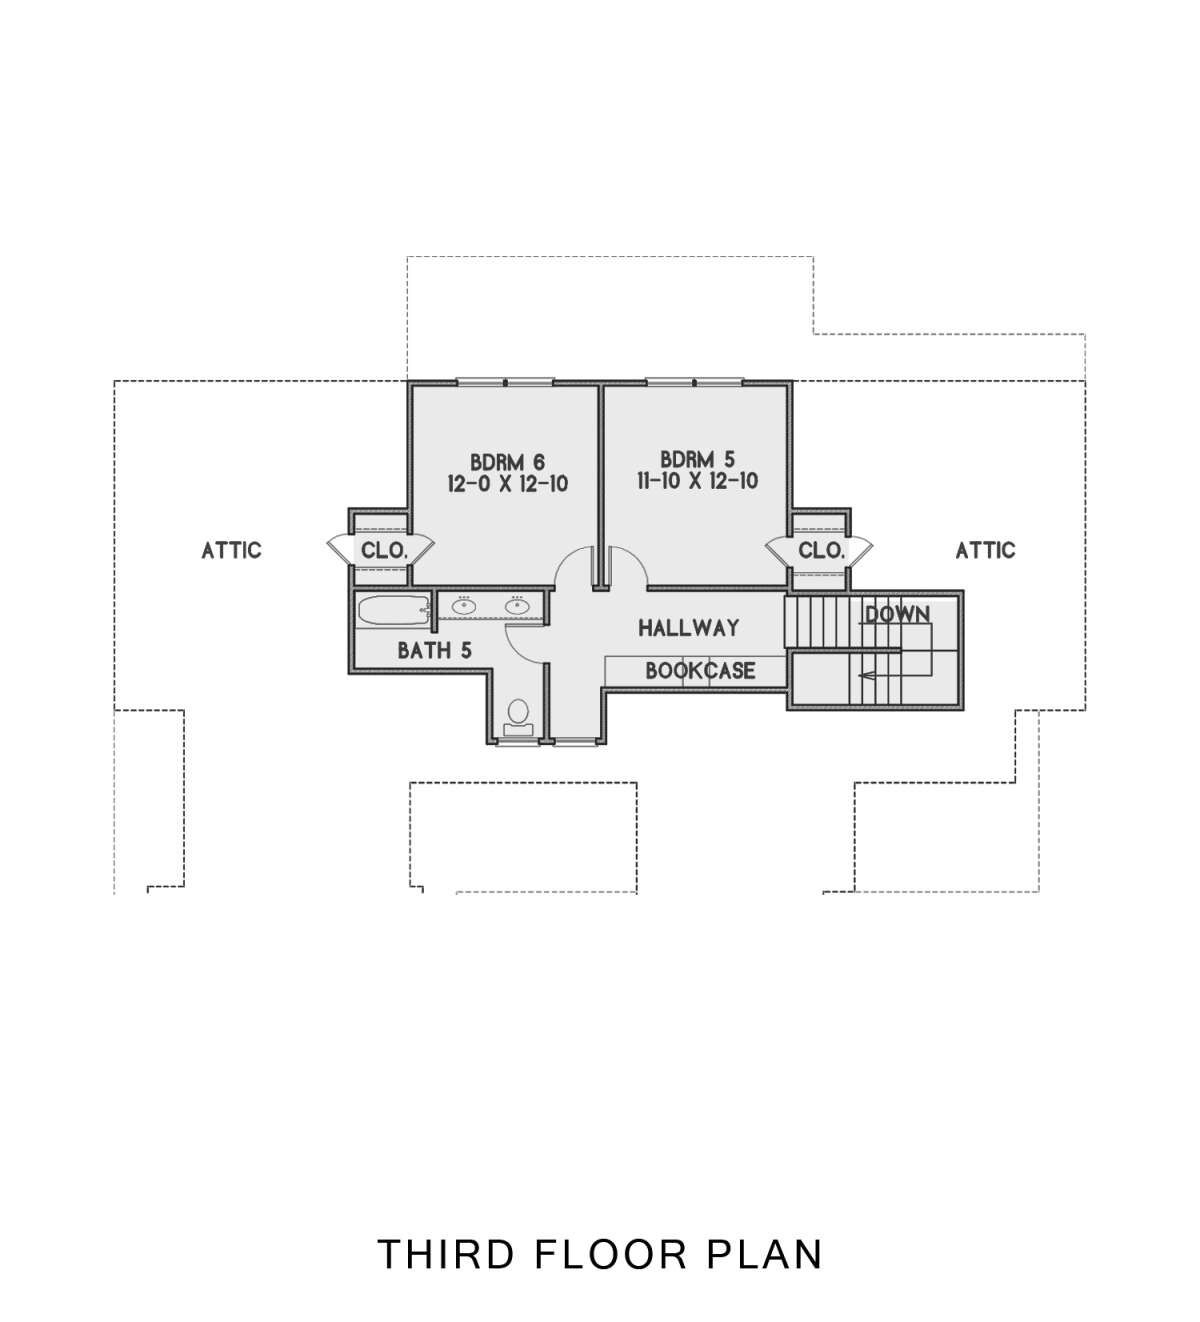 Third Floor for House Plan #4351-00029